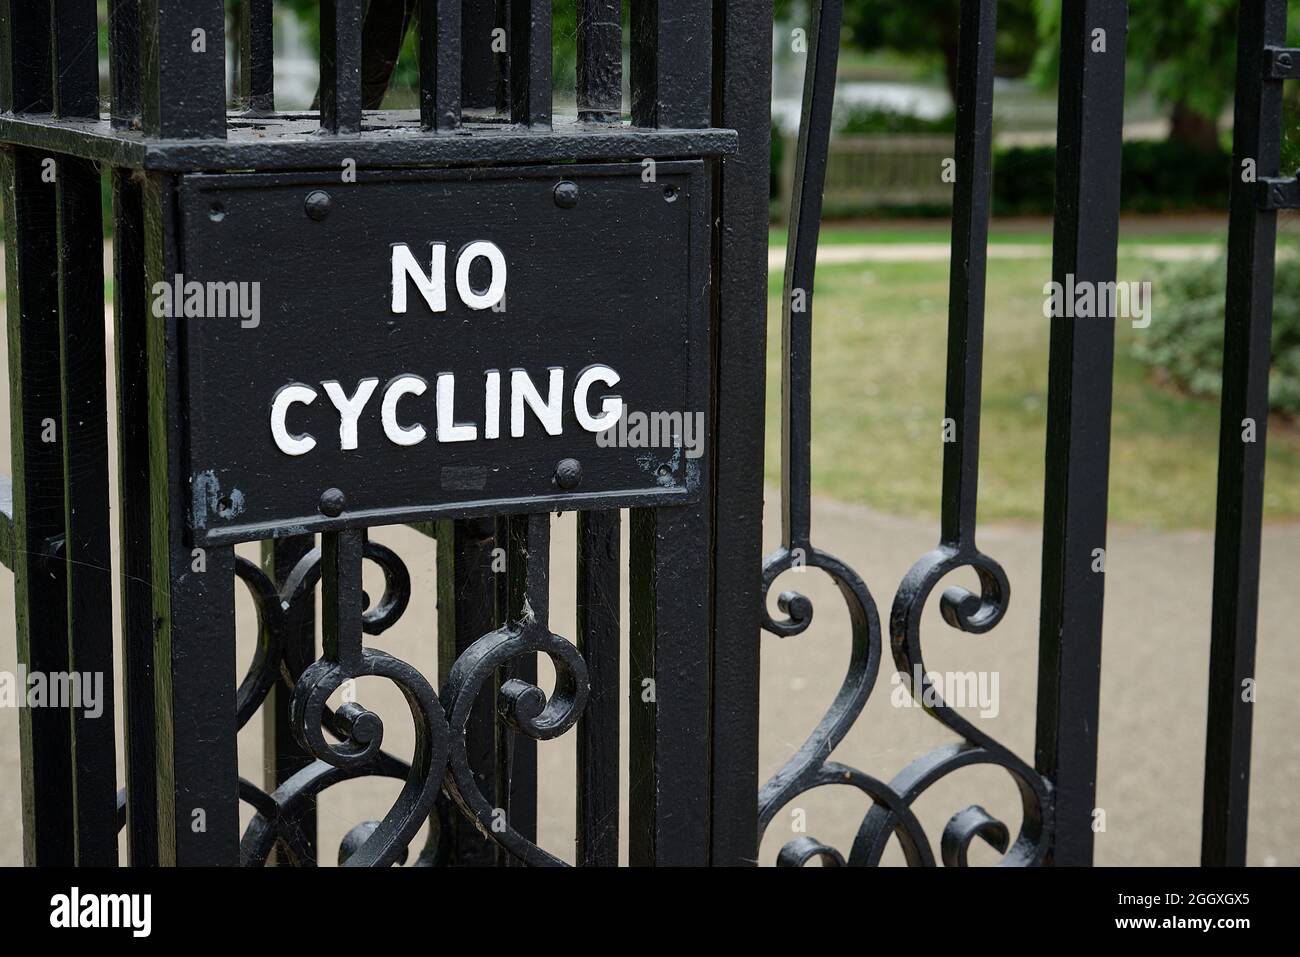 An old No Cycling sign at the entrance to a park in England, UK. A black painted metal sign on wrought iron gates. Stock Photo